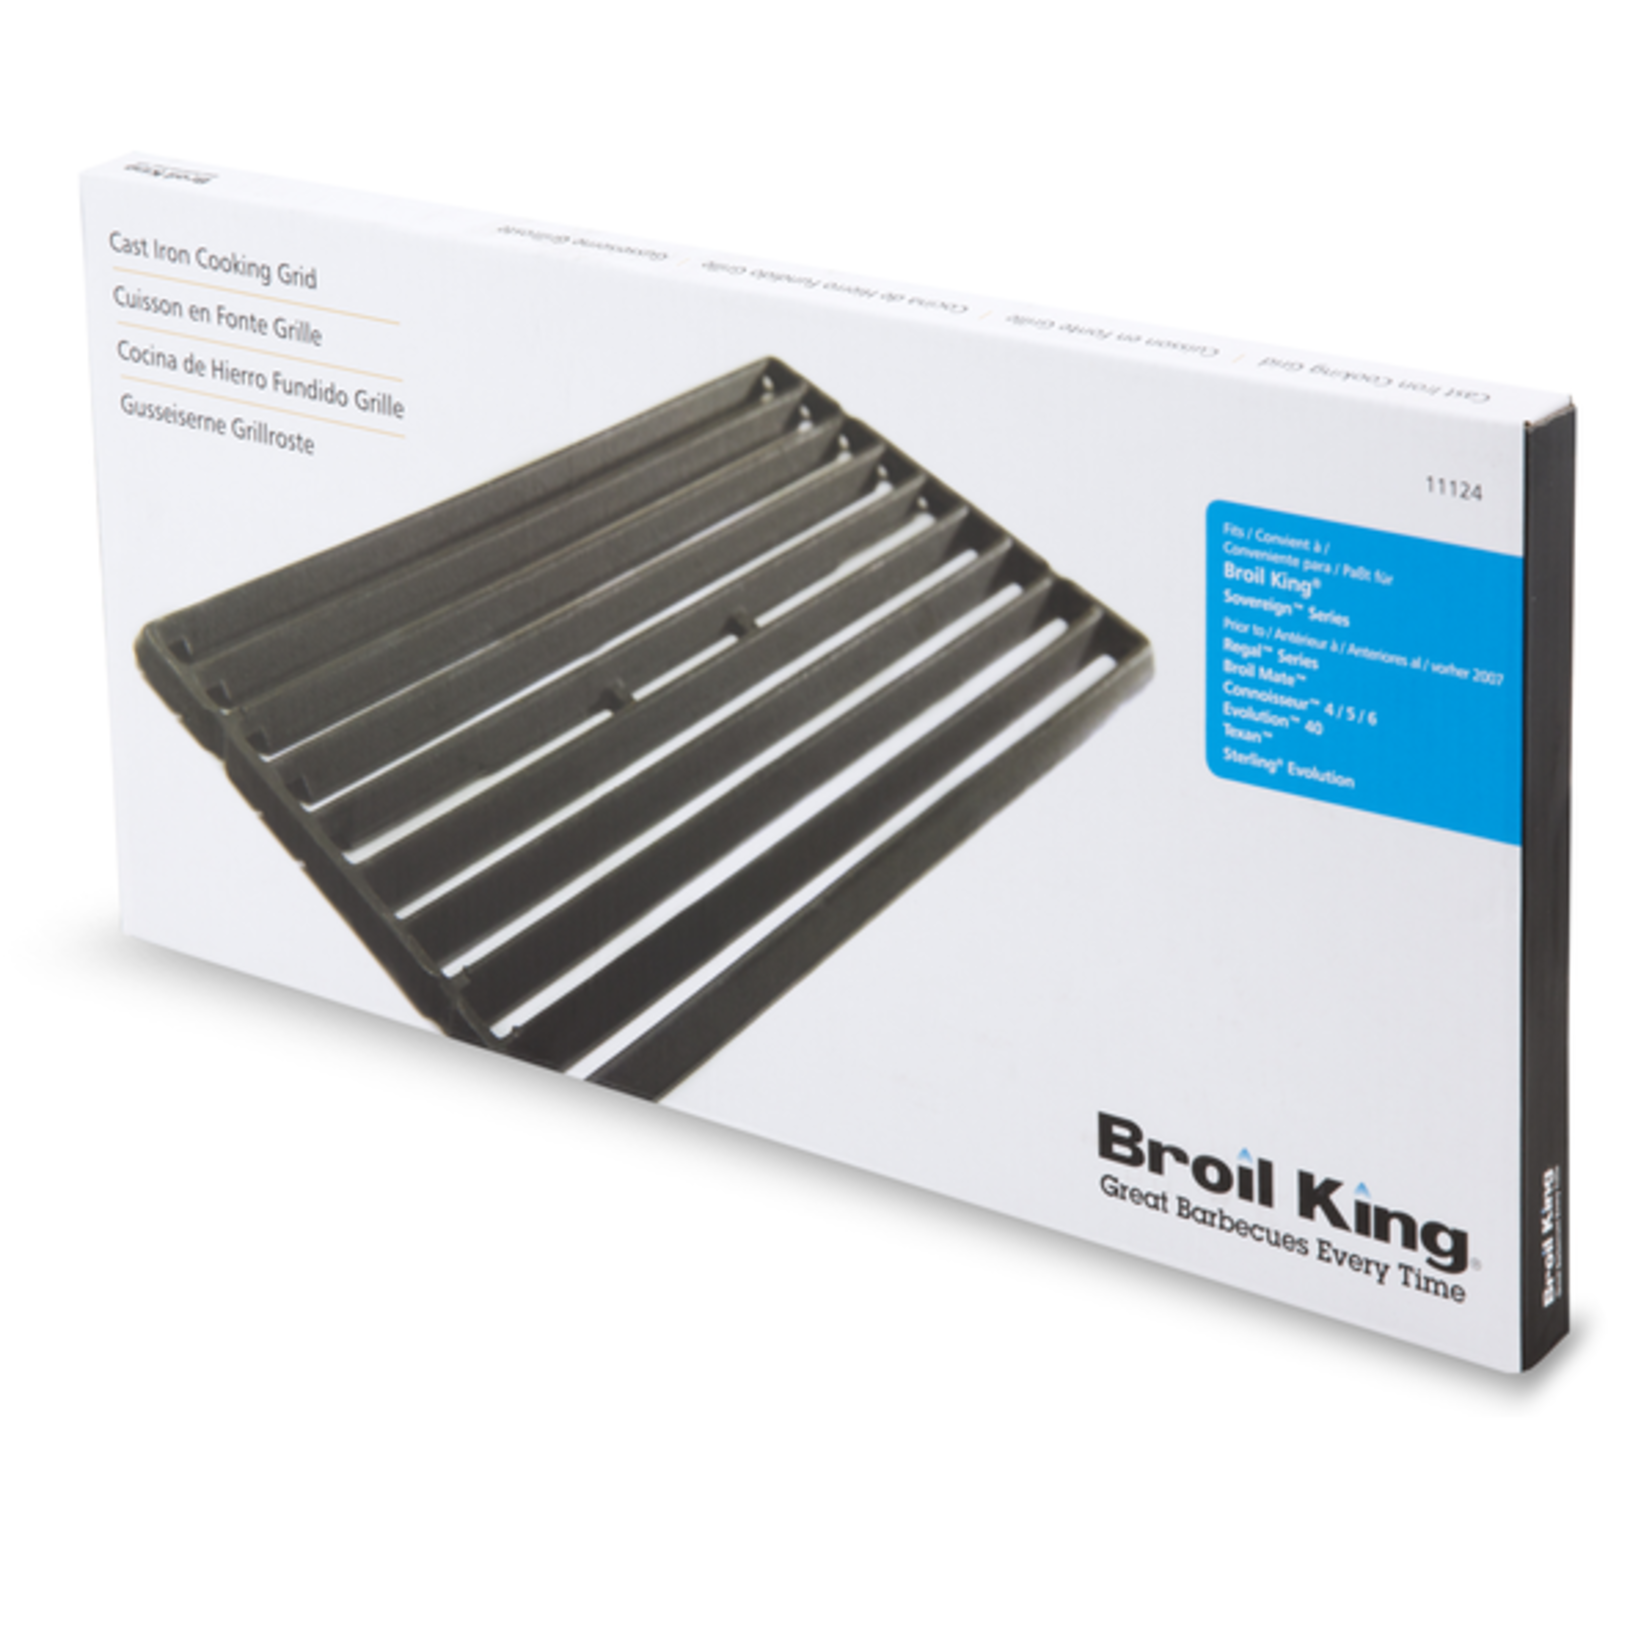 Broil King Cooking Grid - Sovereign - Cast Iron - 1 Piece